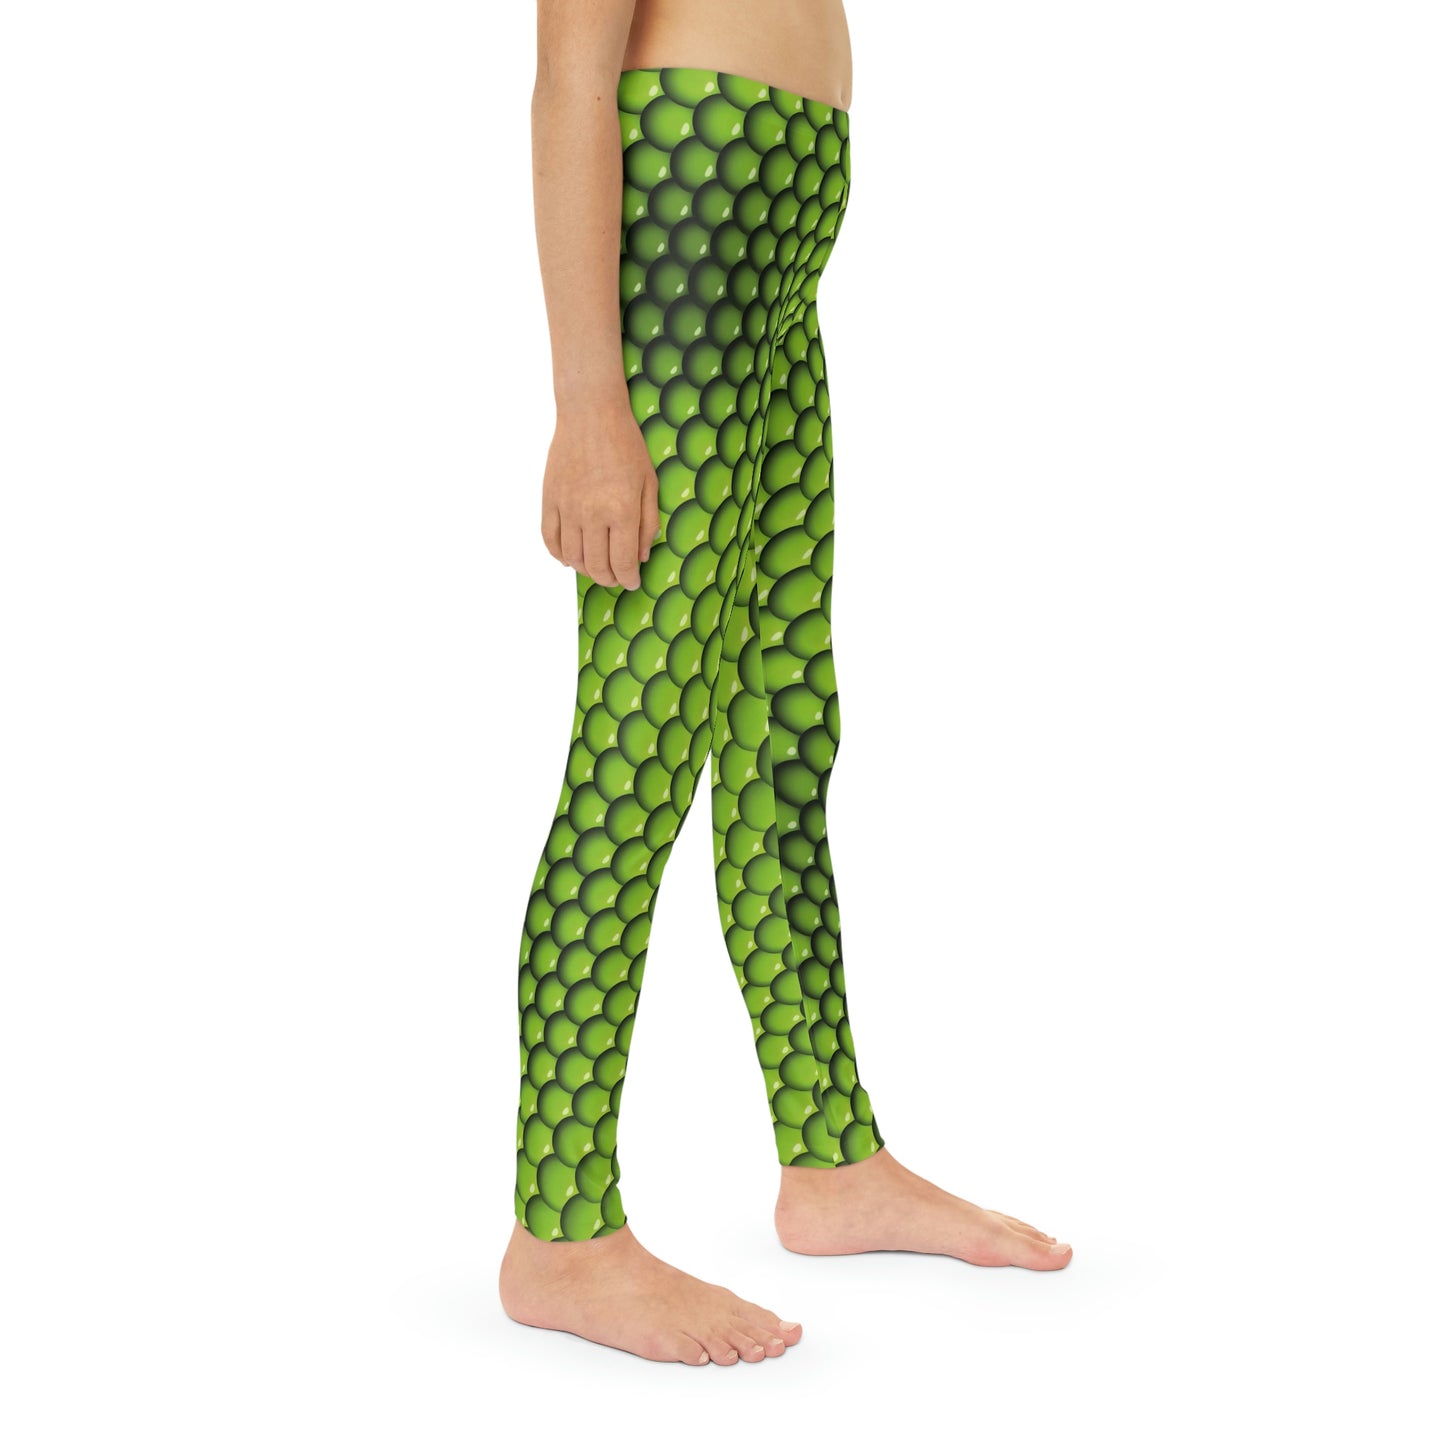 Lizard animal kingdom, Safari Youth Leggings, One of a Kind Gift - Unique Workout Activewear tights for kids, Daughter, Niece Christmas Gift